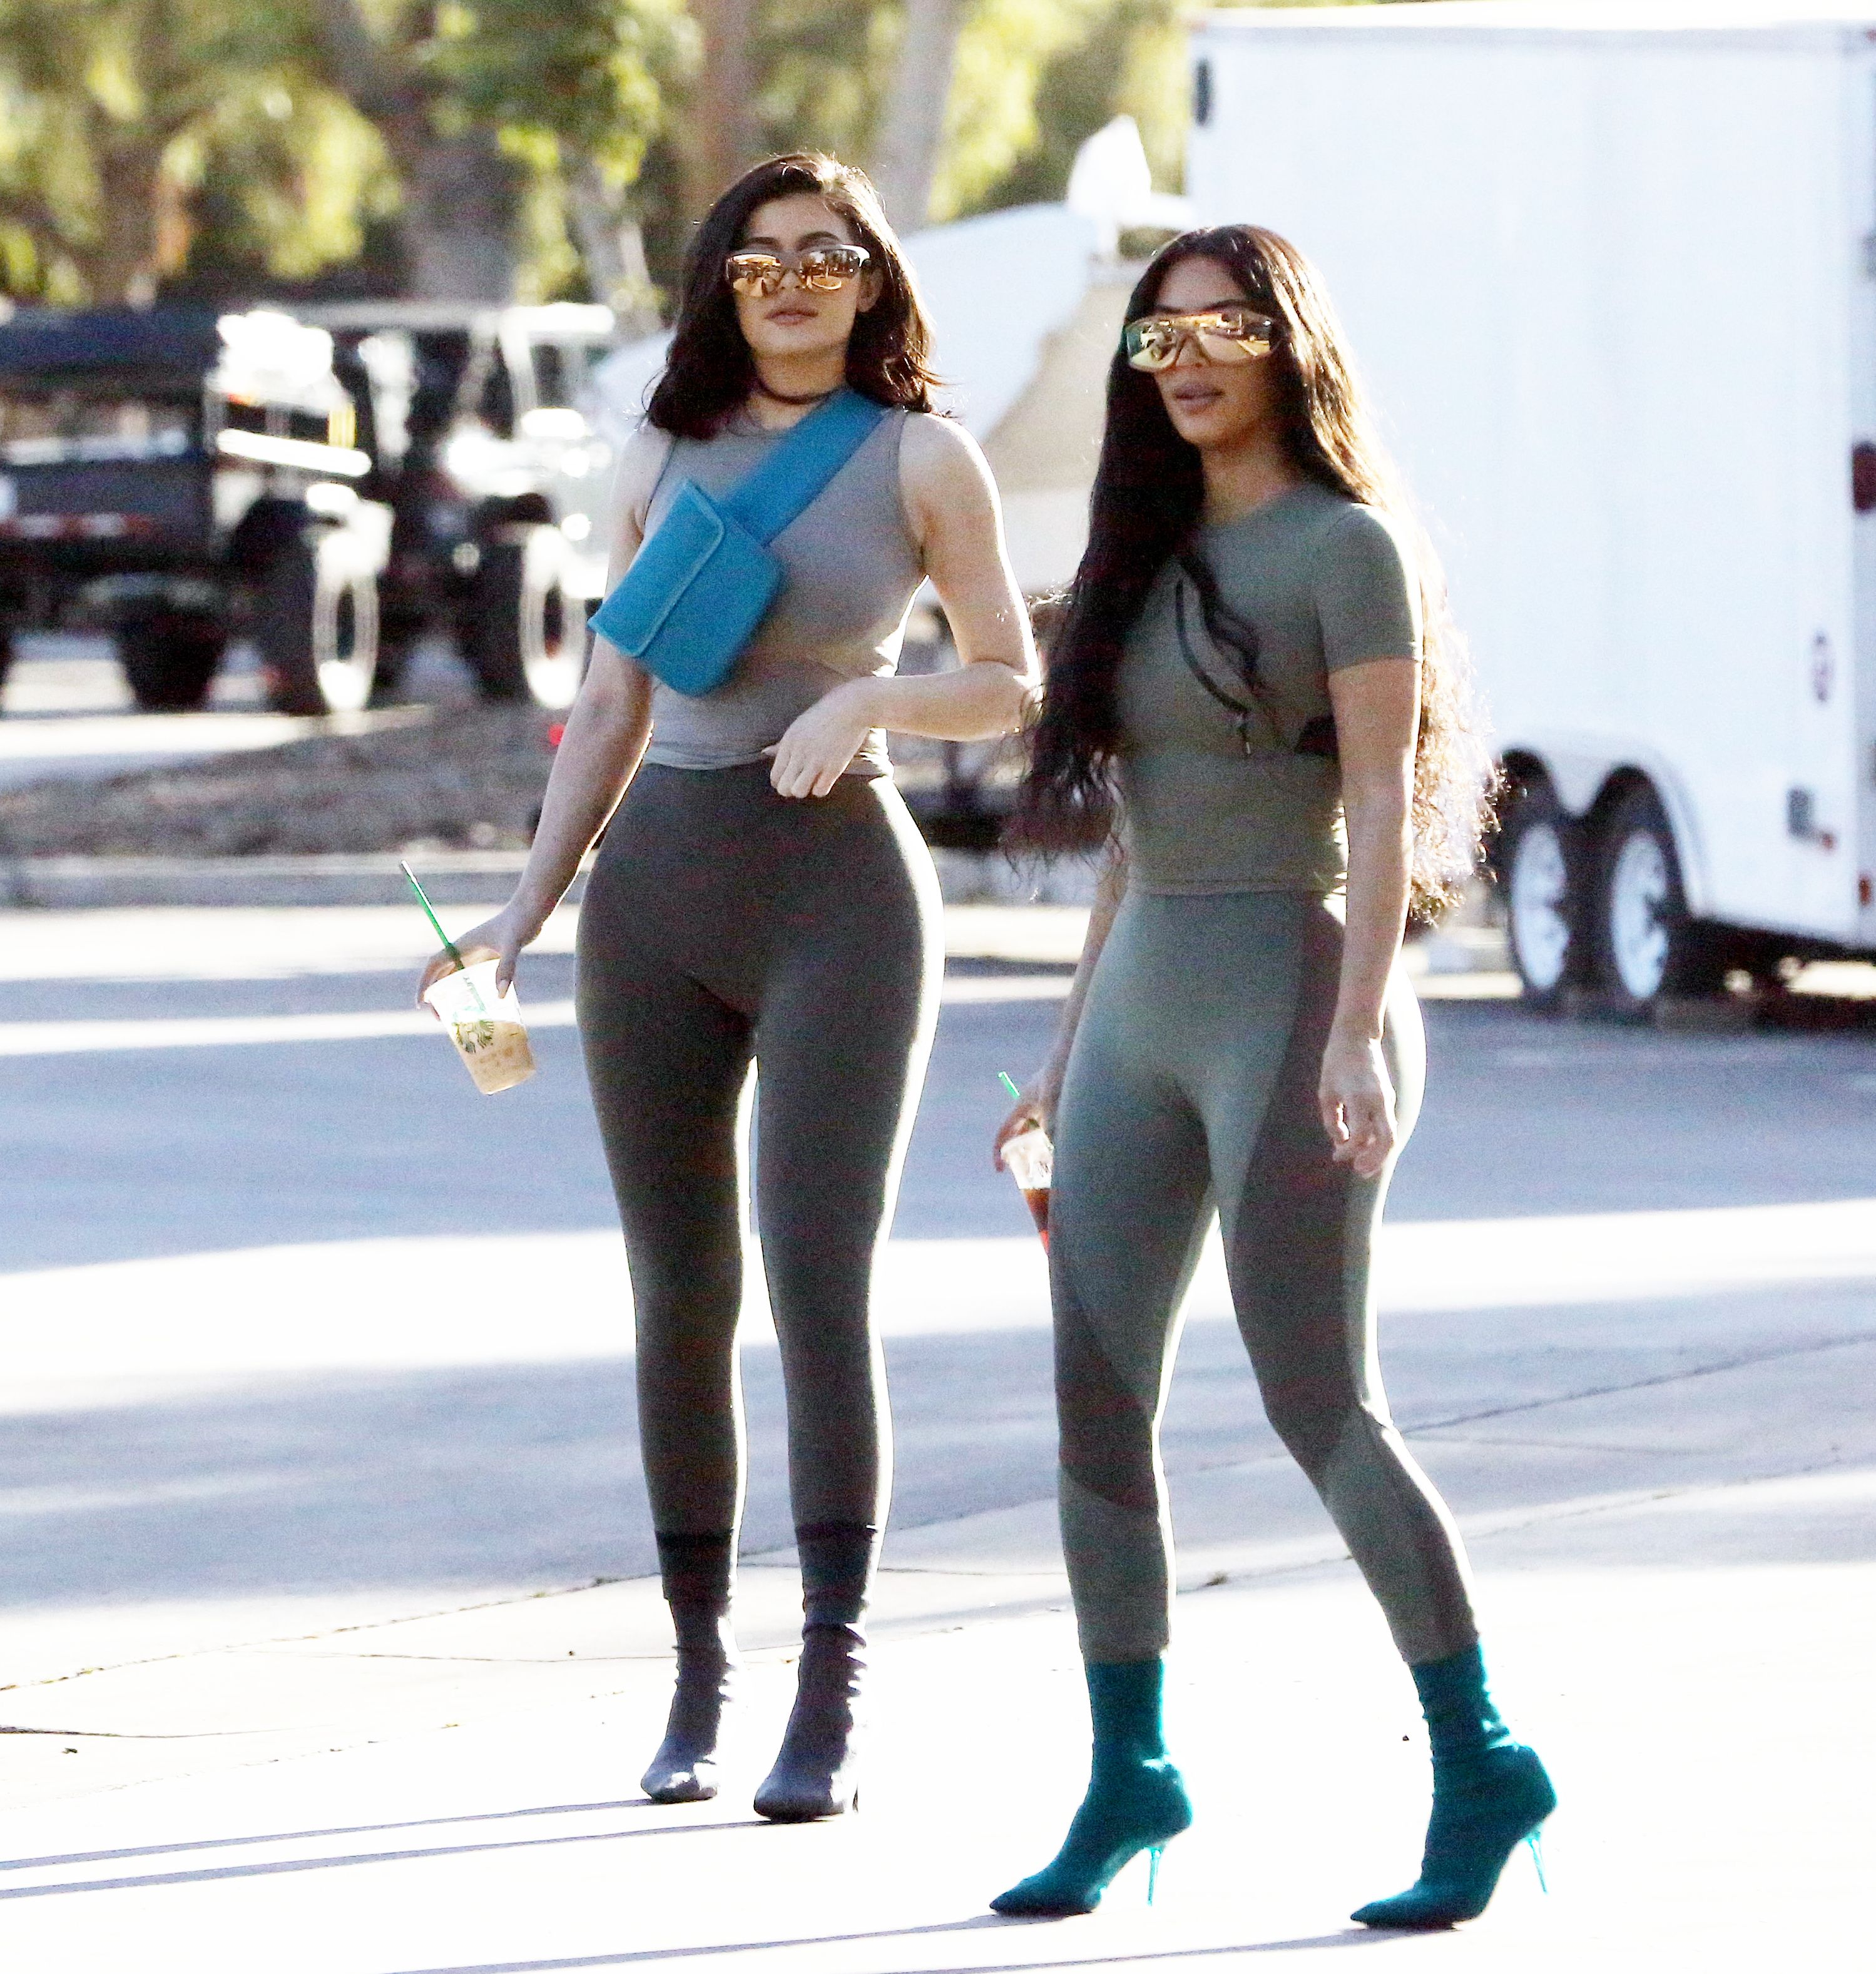 Kim Kardashian and Kylie Jenner Look Like in These Photos – Kylie and Kim Wear Leggings, Yeezy